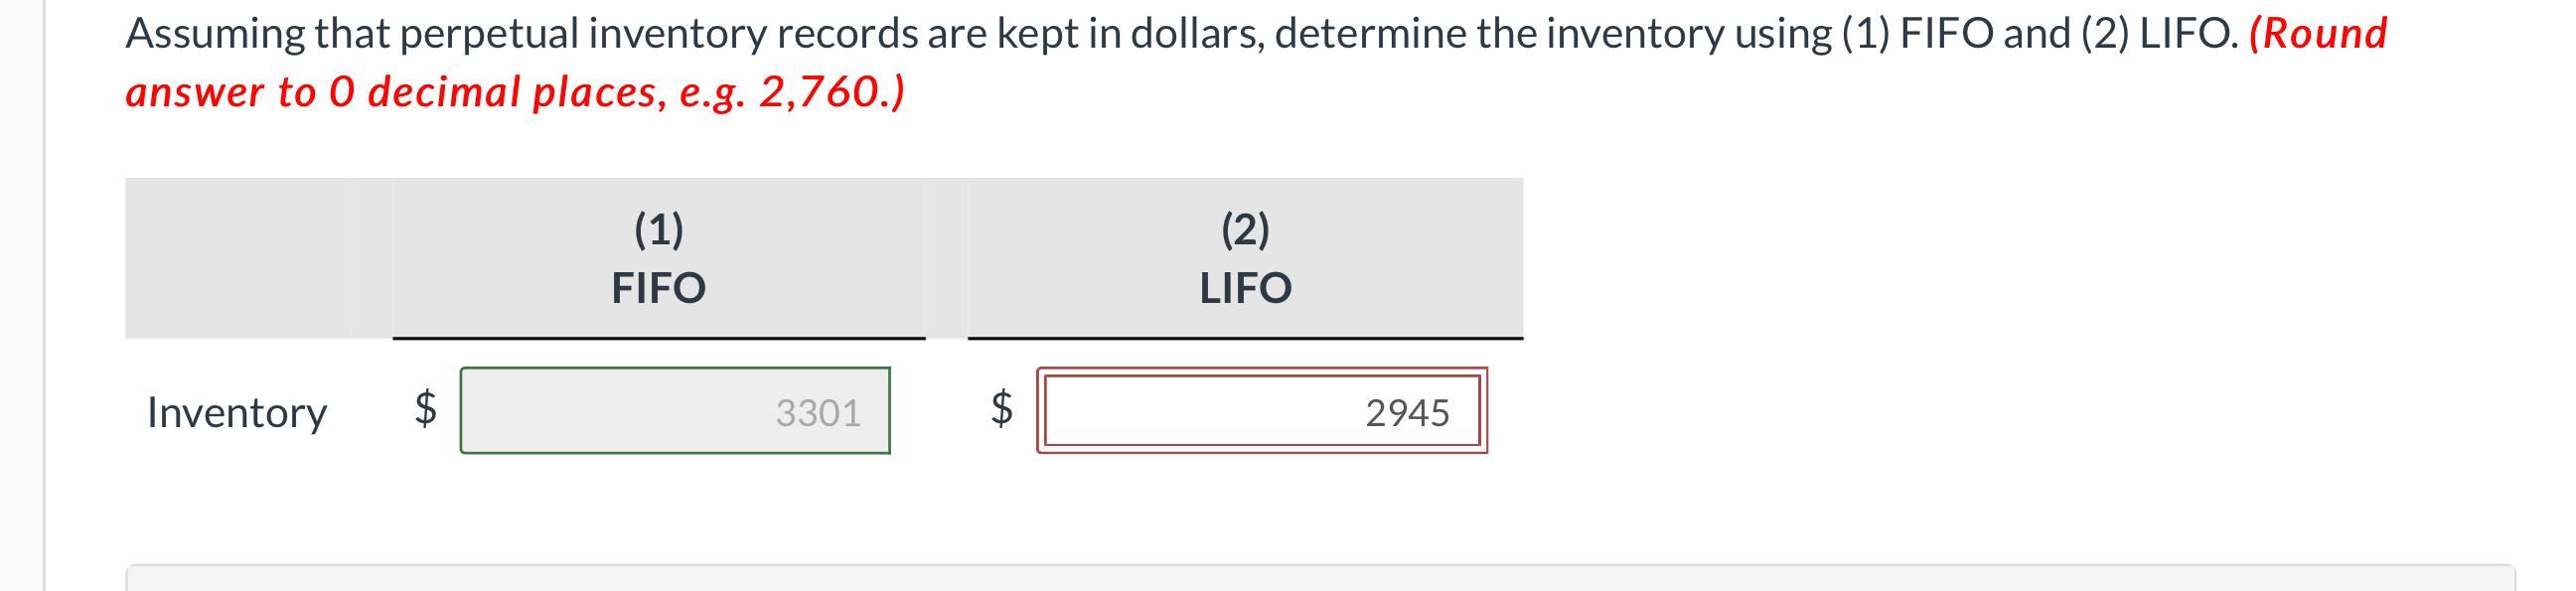 Assuming that perpetual inventory records are kept in dollars, determine the inventory using (1) FIFO and (2) LIFO. (Roundan